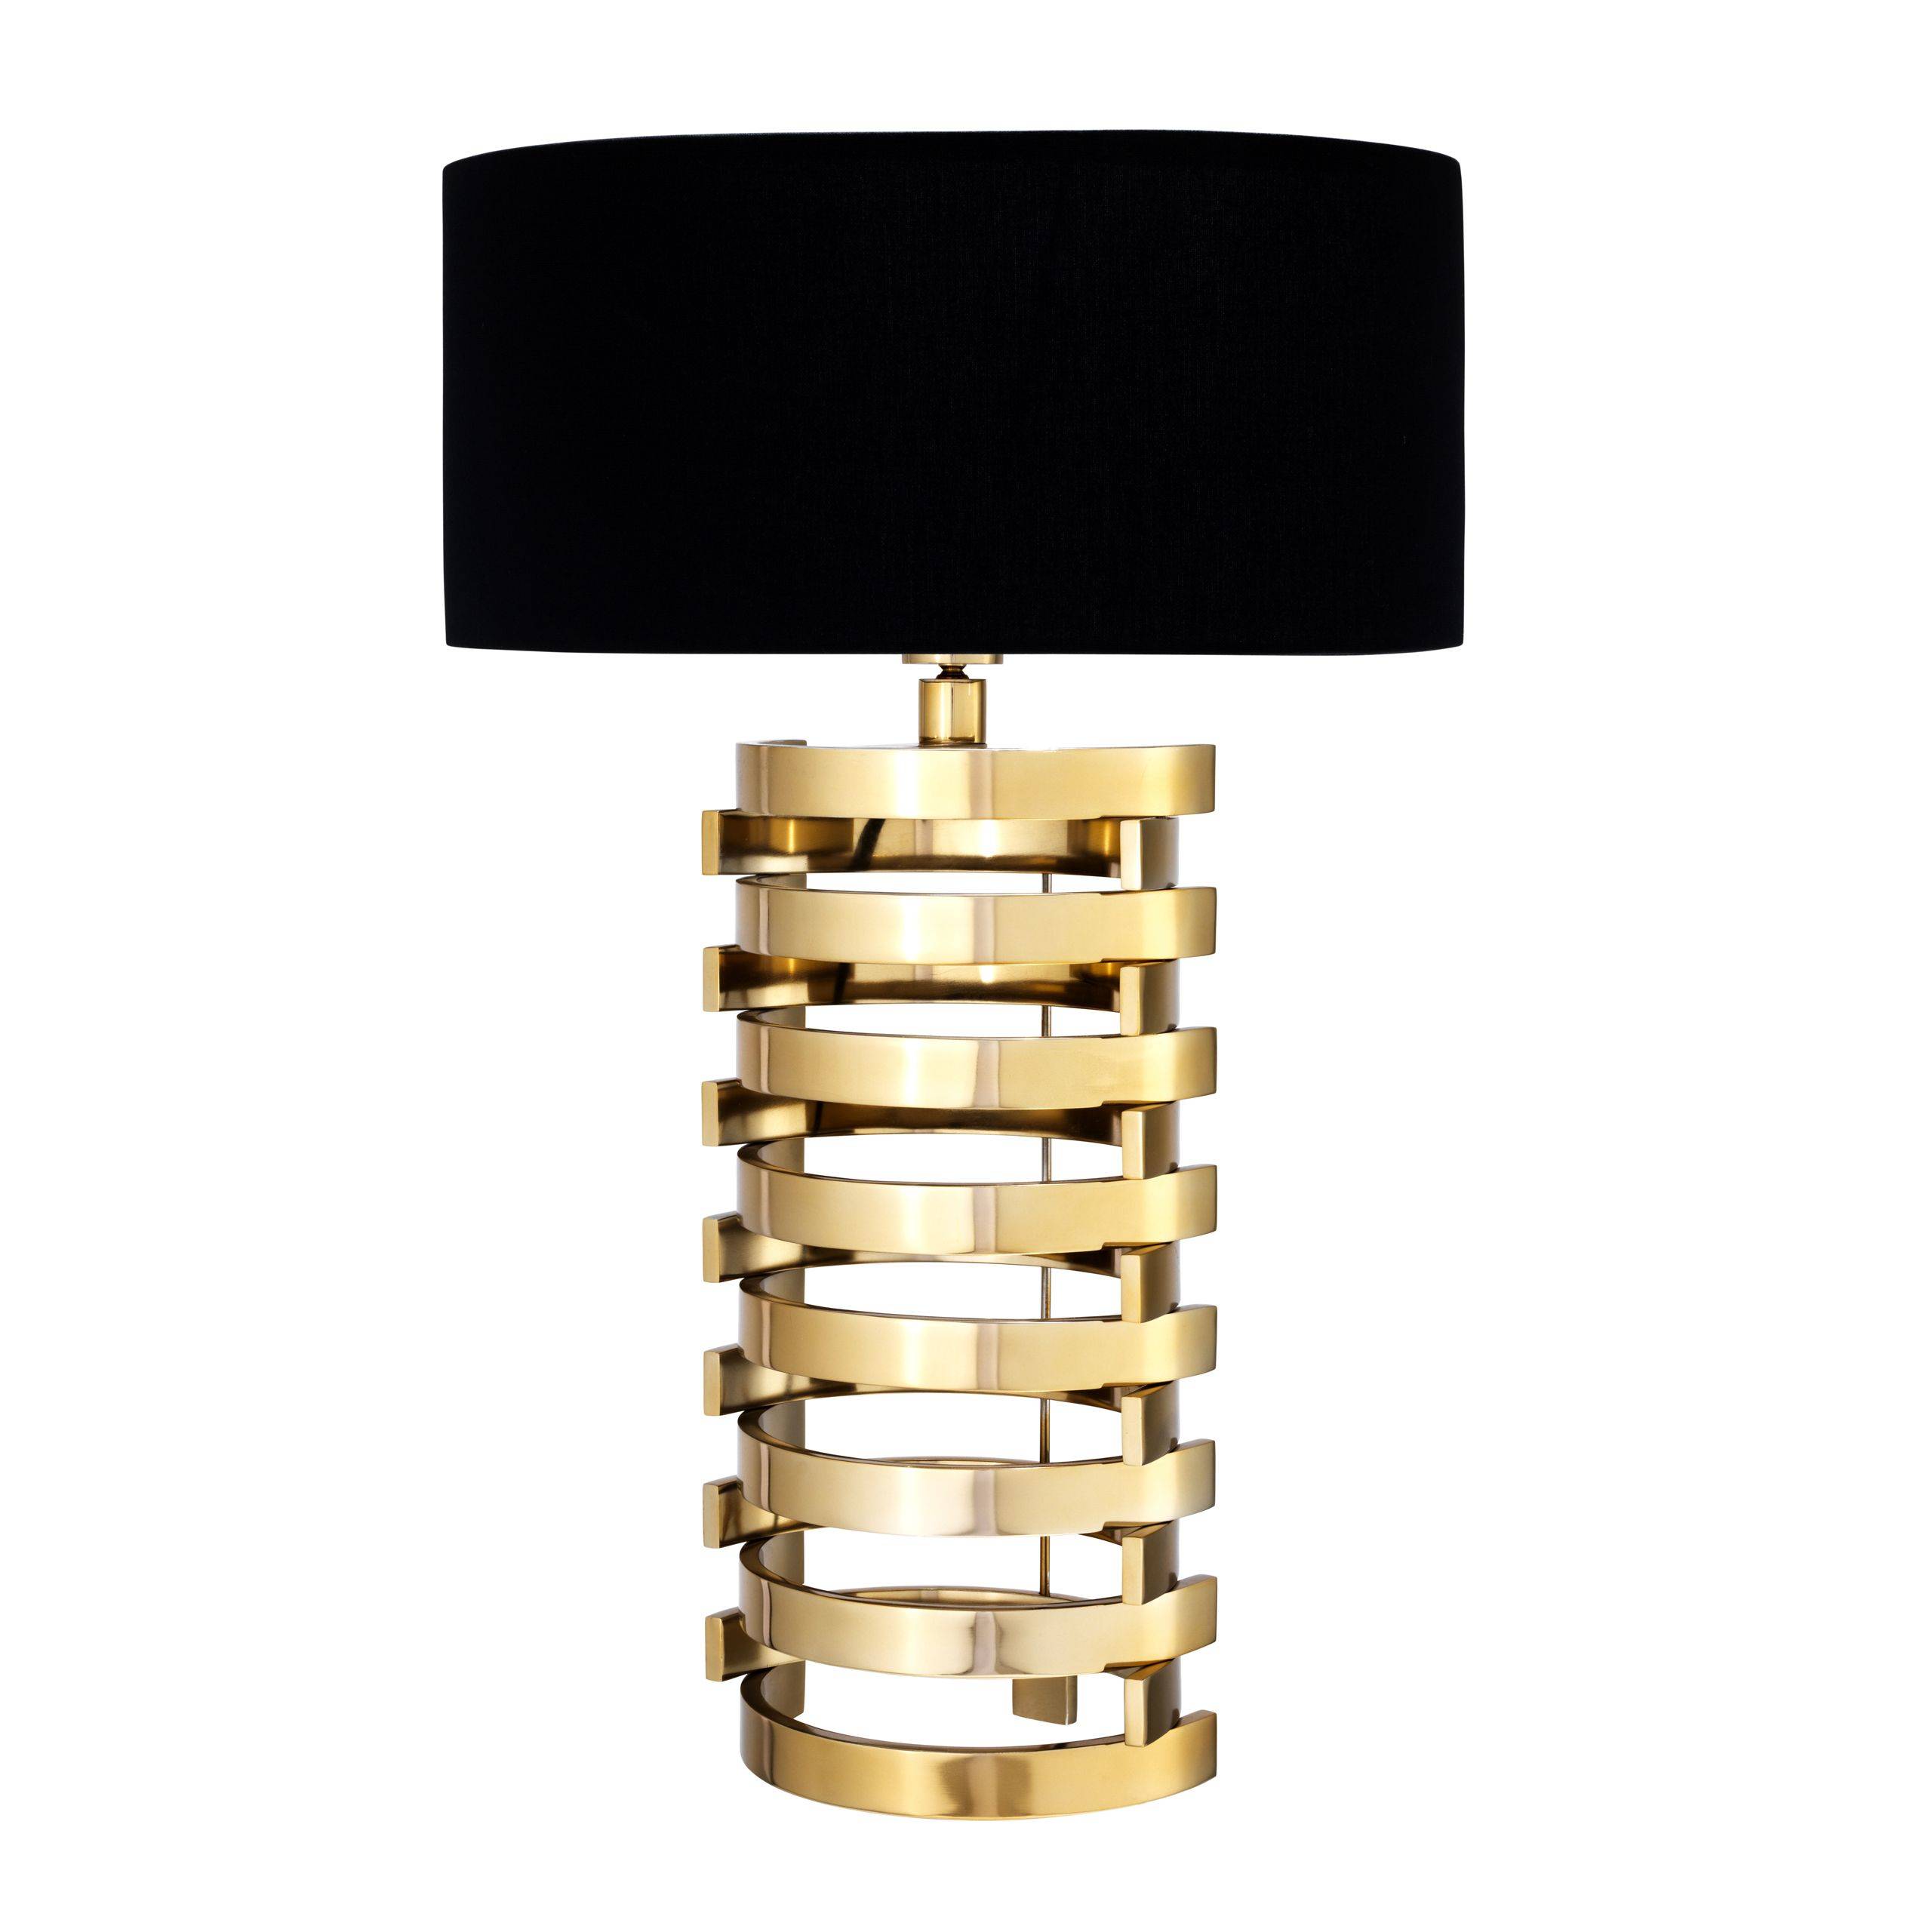 Boxter Table Lamps[S/L] - [Gold/Nickel] - Eichholtz - Luxury Lighting Boutique